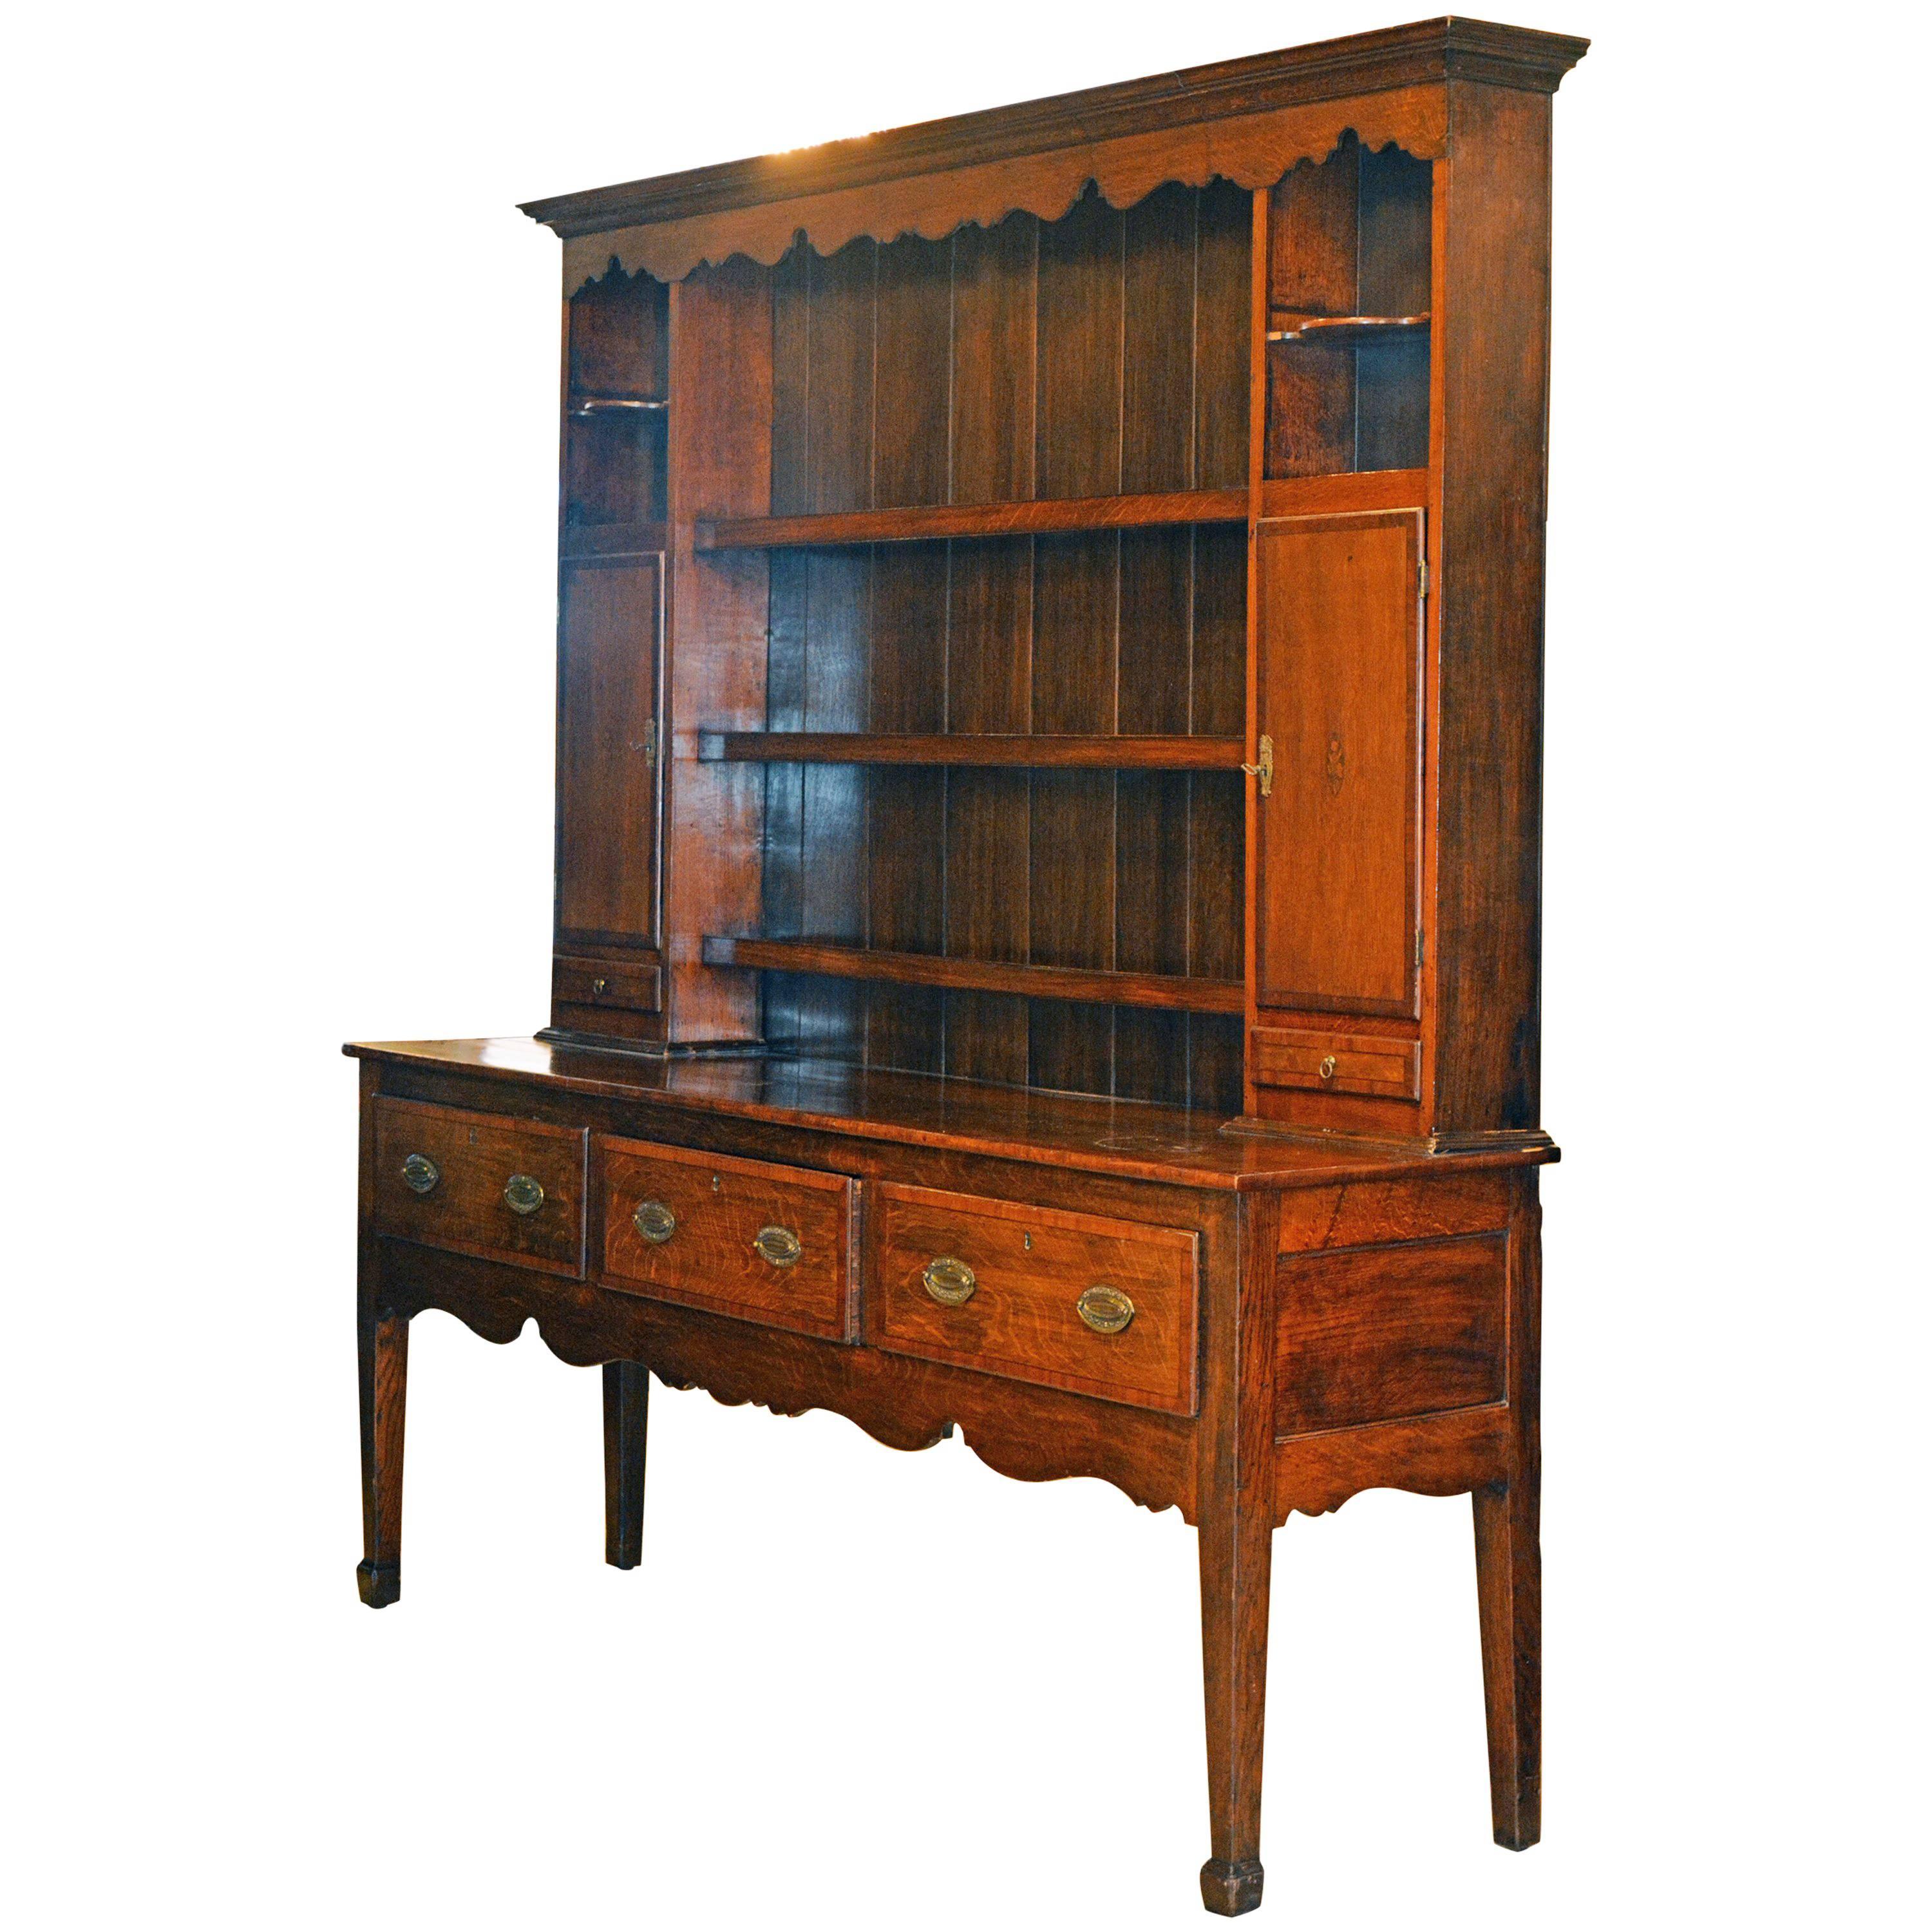 Charming Late 18th Century English Oak and Mahogany Accented Welsh Dresser